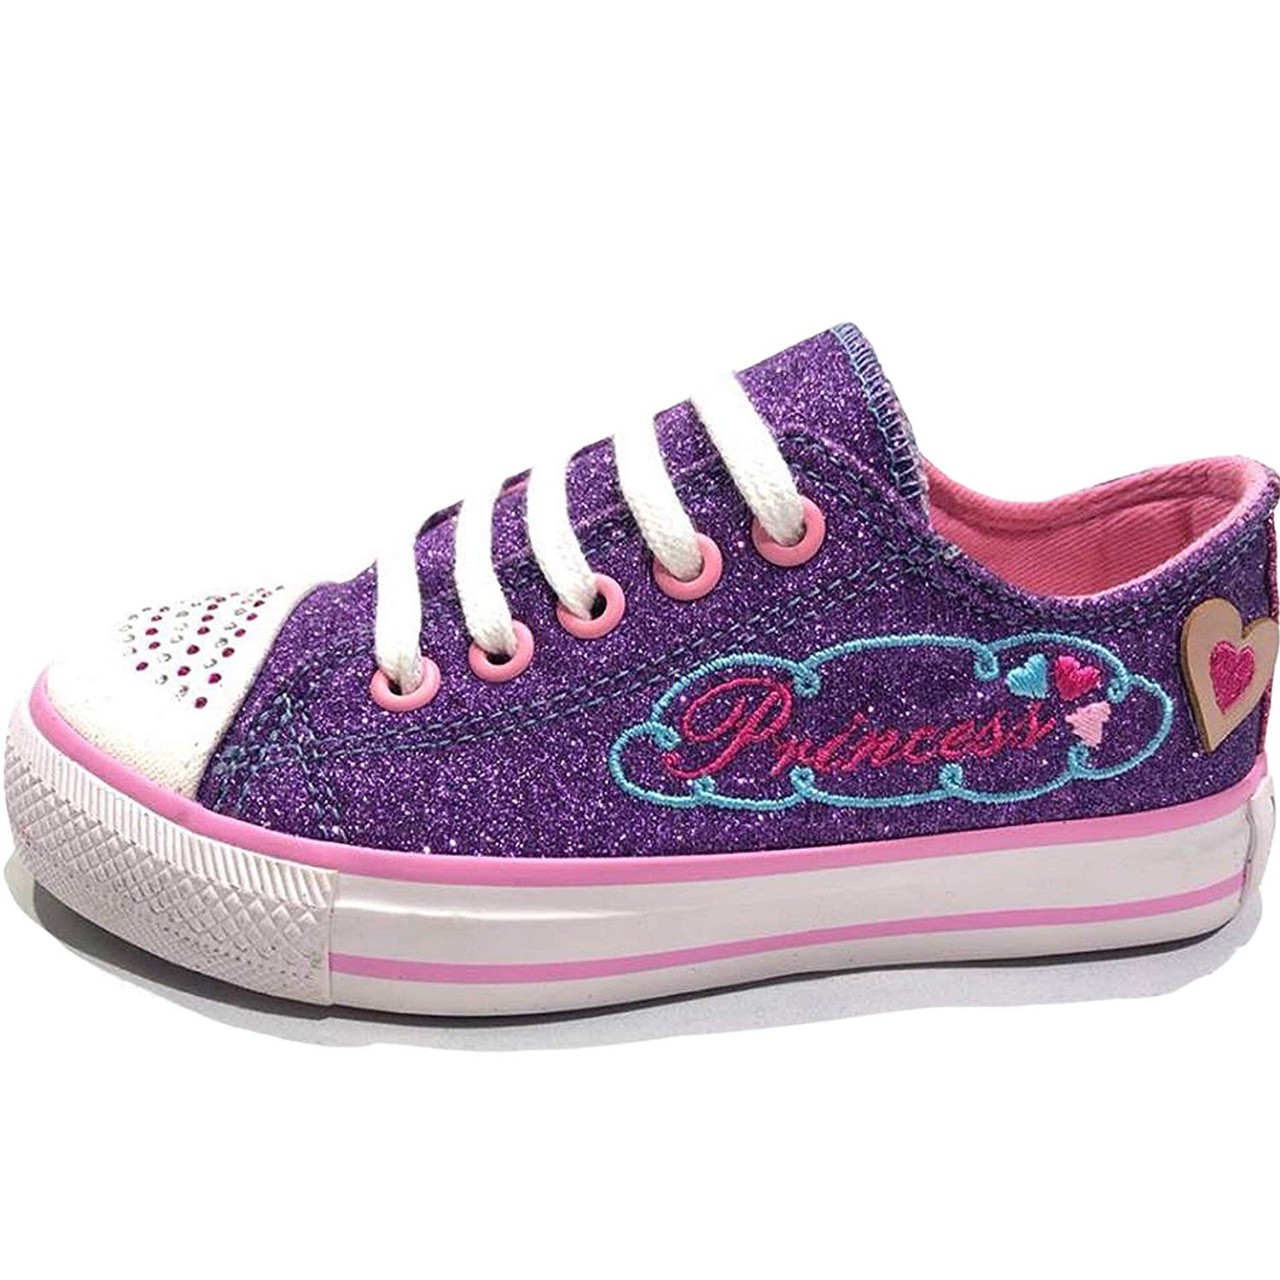 Little Girls Sneakers Fashion Casual Lightweight Sneakers Toddlers Little Kids Big Kids